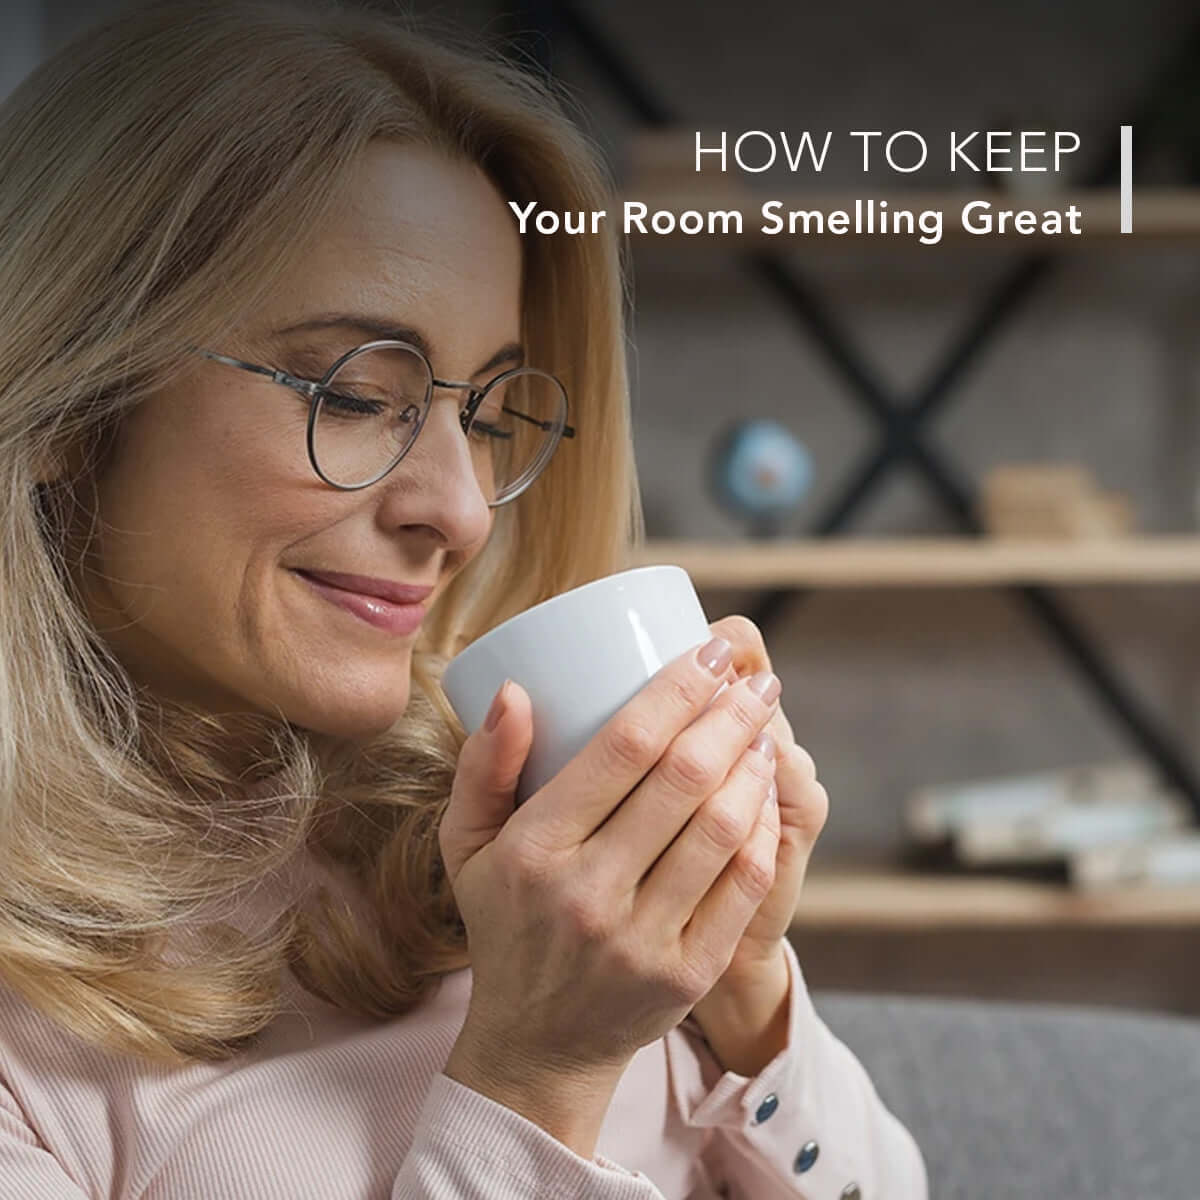 How to Keep Your Room Smelling Great